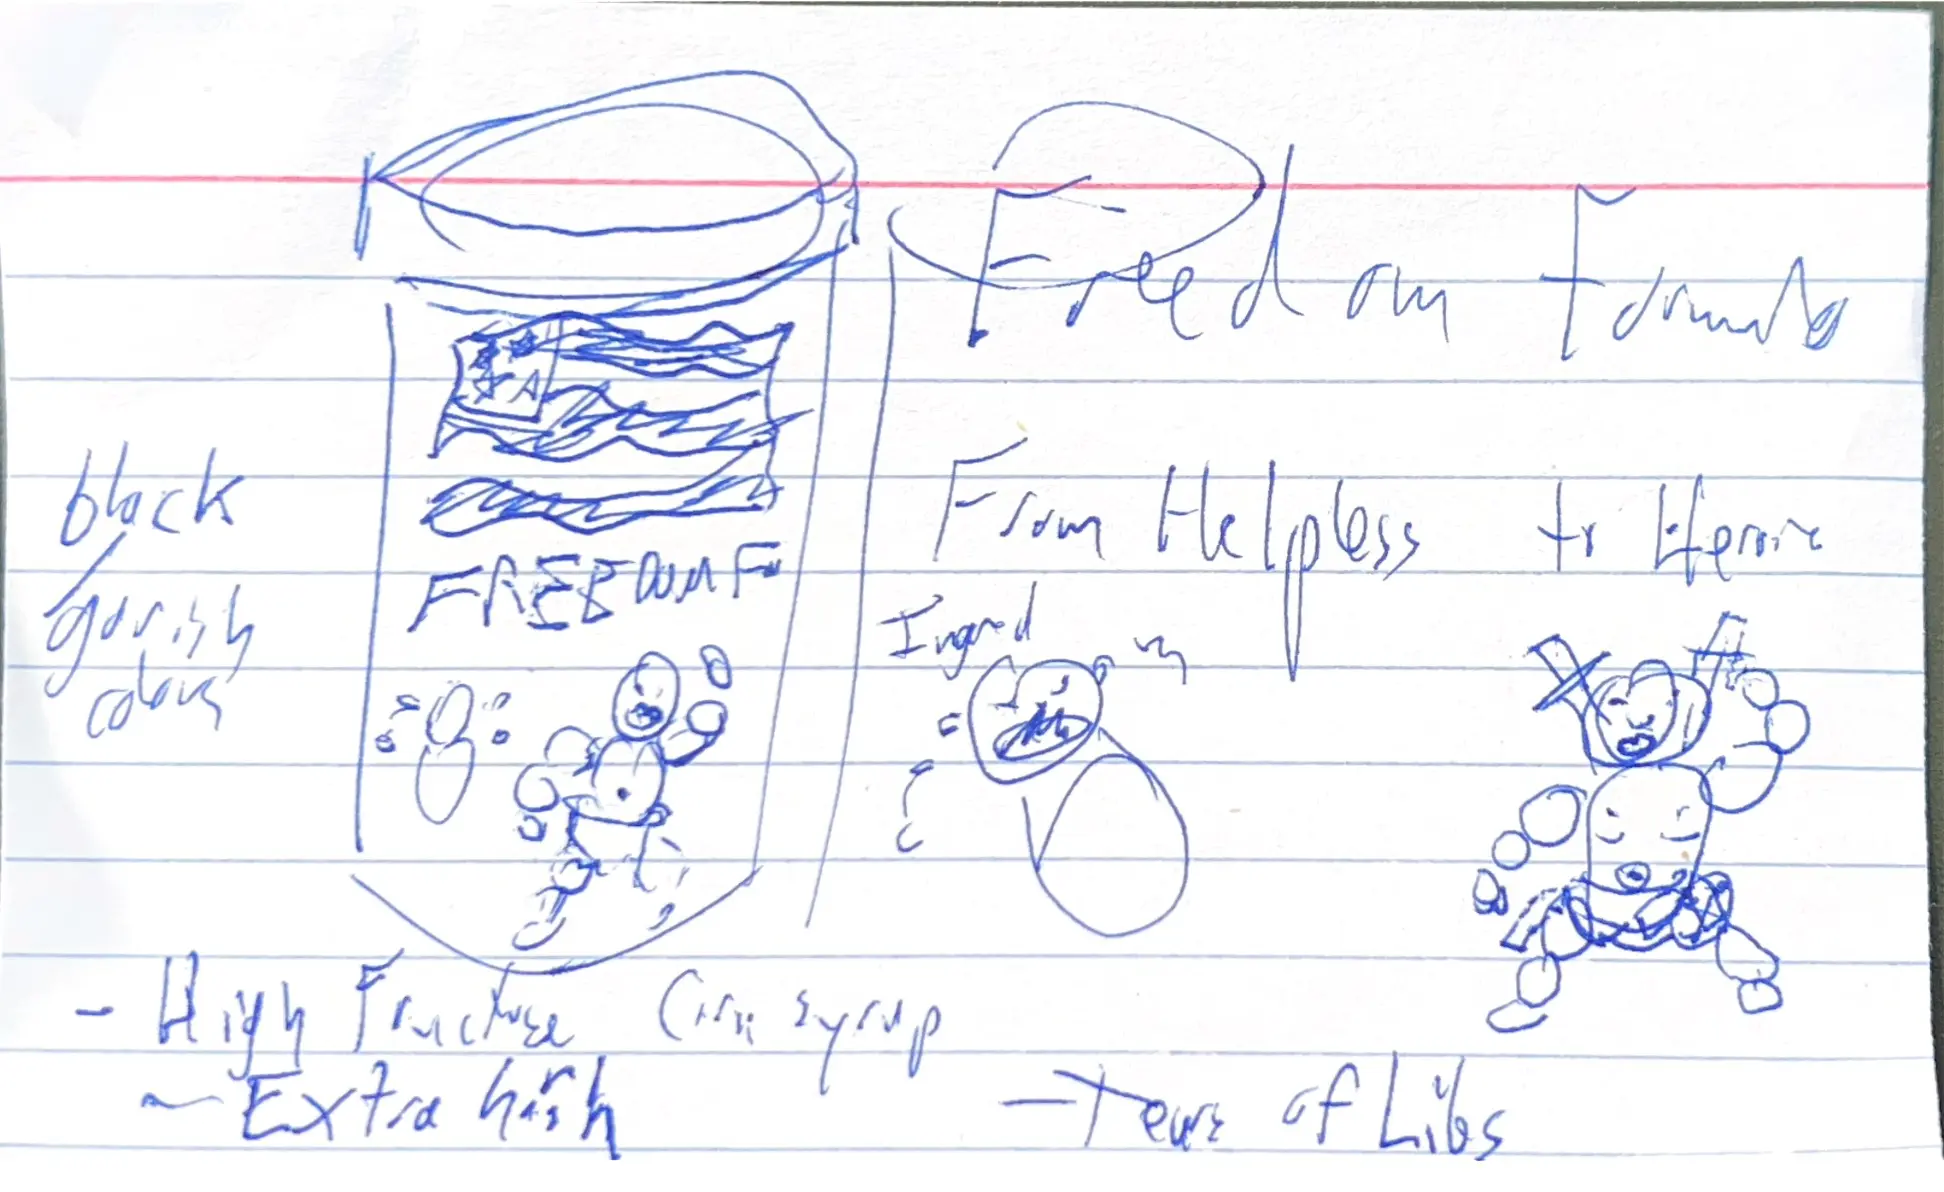 Rough sketch of freedom formula, with same basic design. “From helpless to heroic”